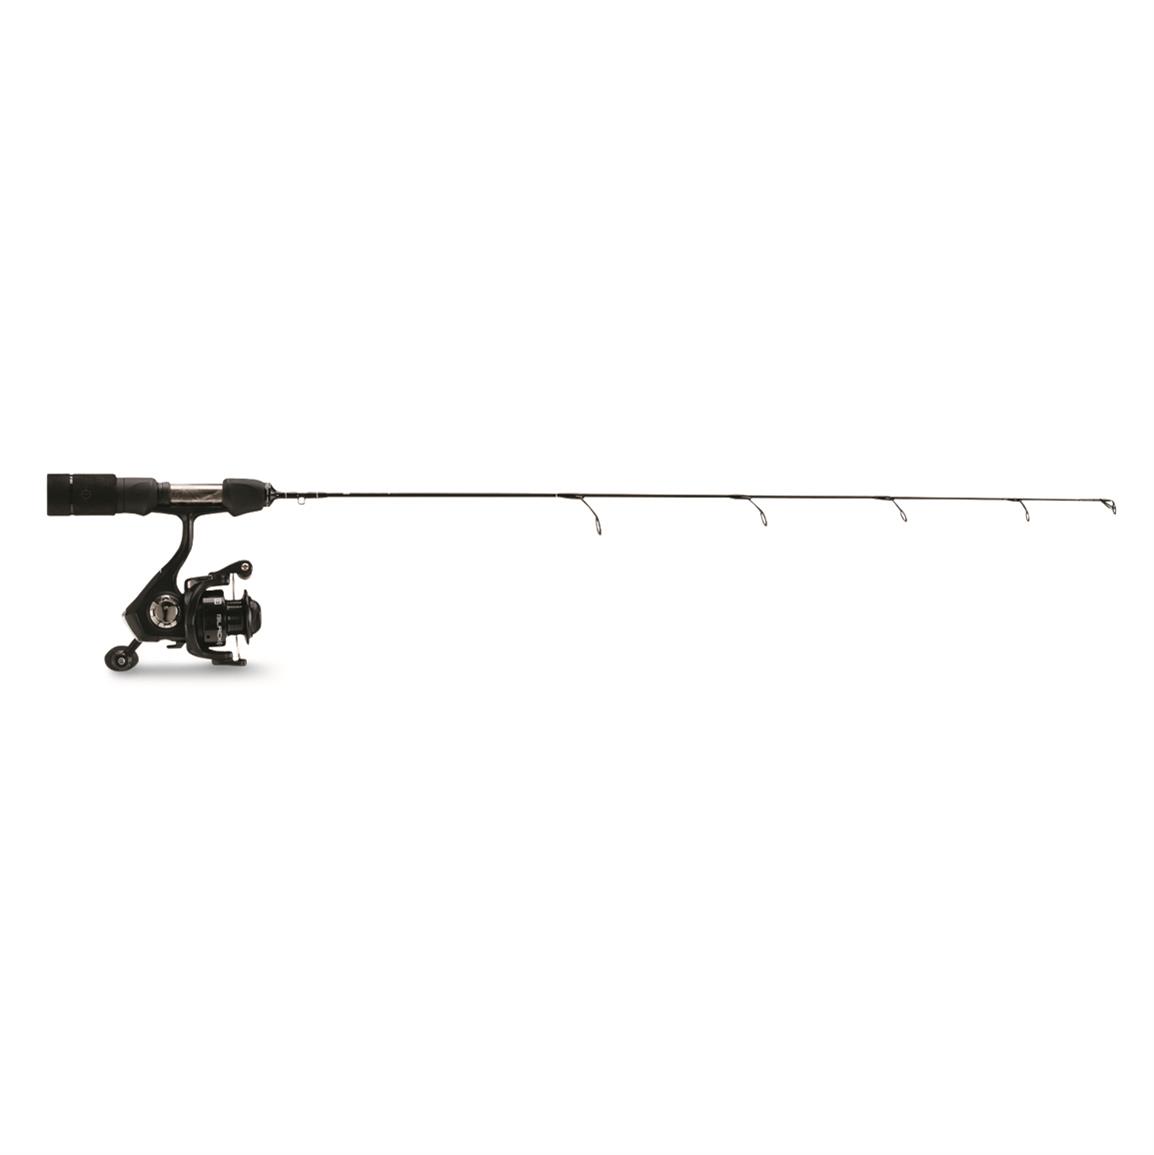 13 Fishing Wicked Ice Hornet Ice Fishing Combo, 27 Length, Ultra Light  Power - 723684, Ice Fishing Combos at Sportsman's Guide